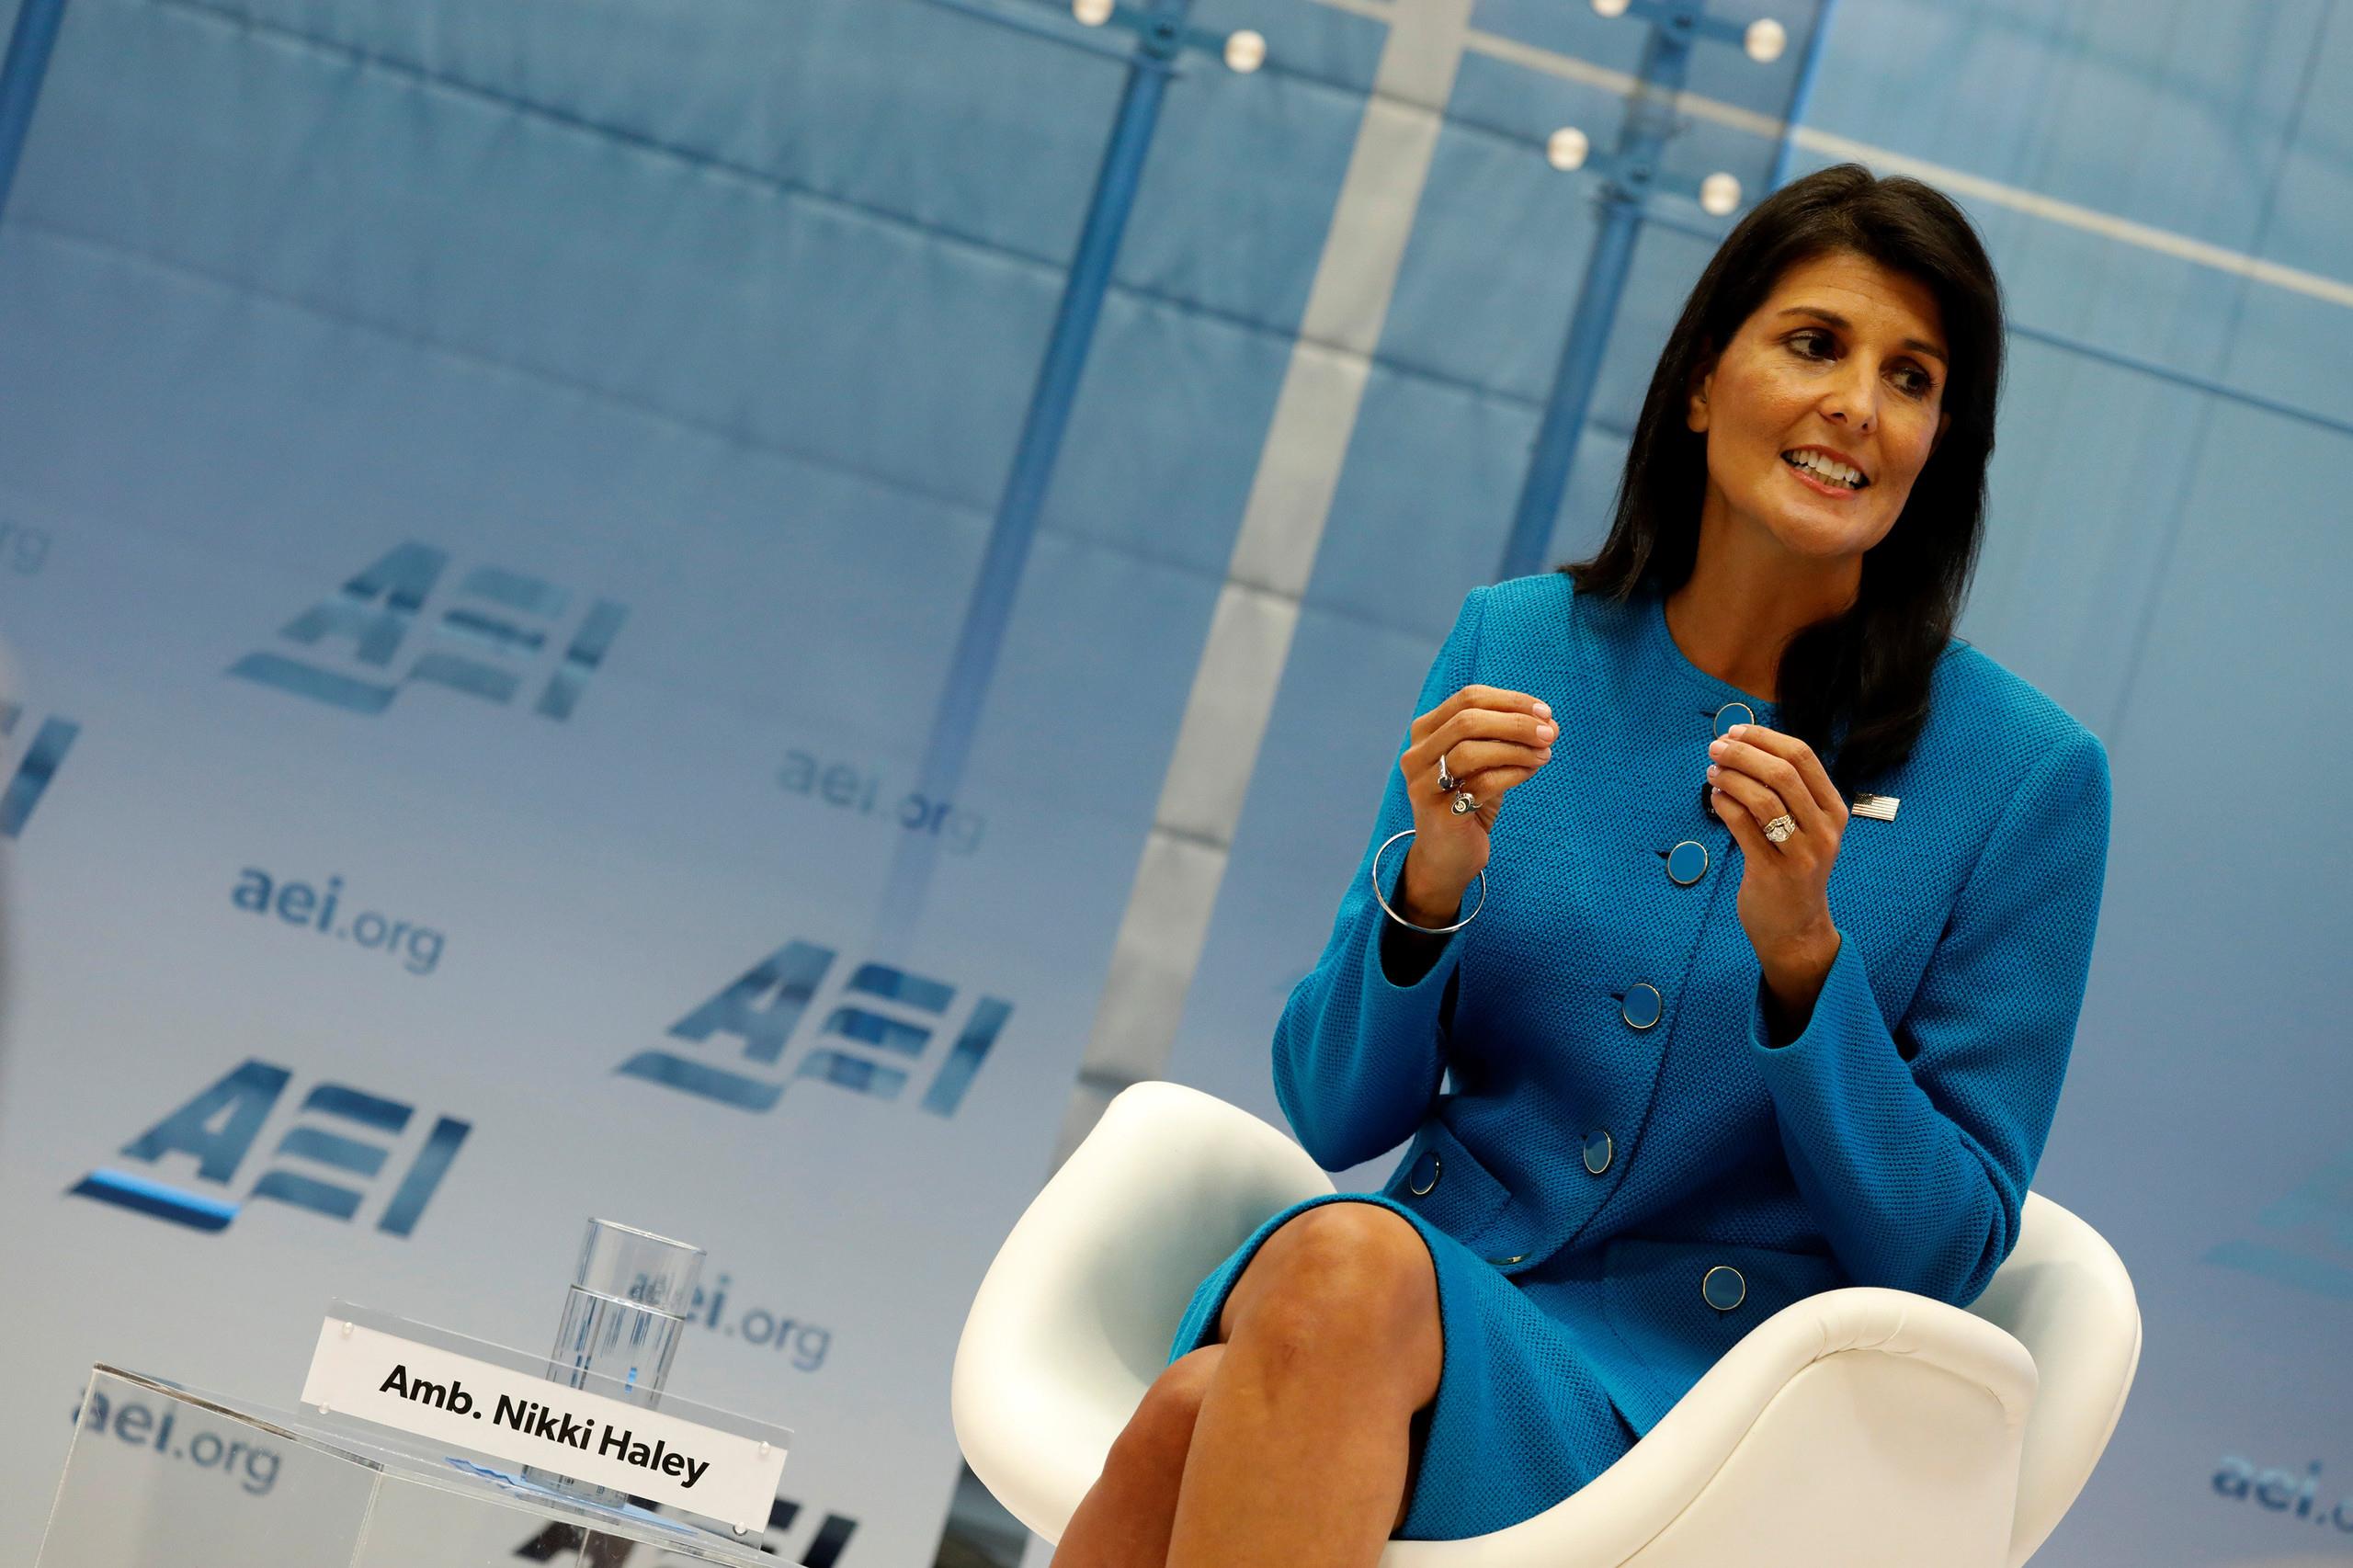 US Ambassador to the UN, Nikki Haley, speaks about the Iran nuclear deal at the American Enterprise Institute in Washington, September 5, 2017.